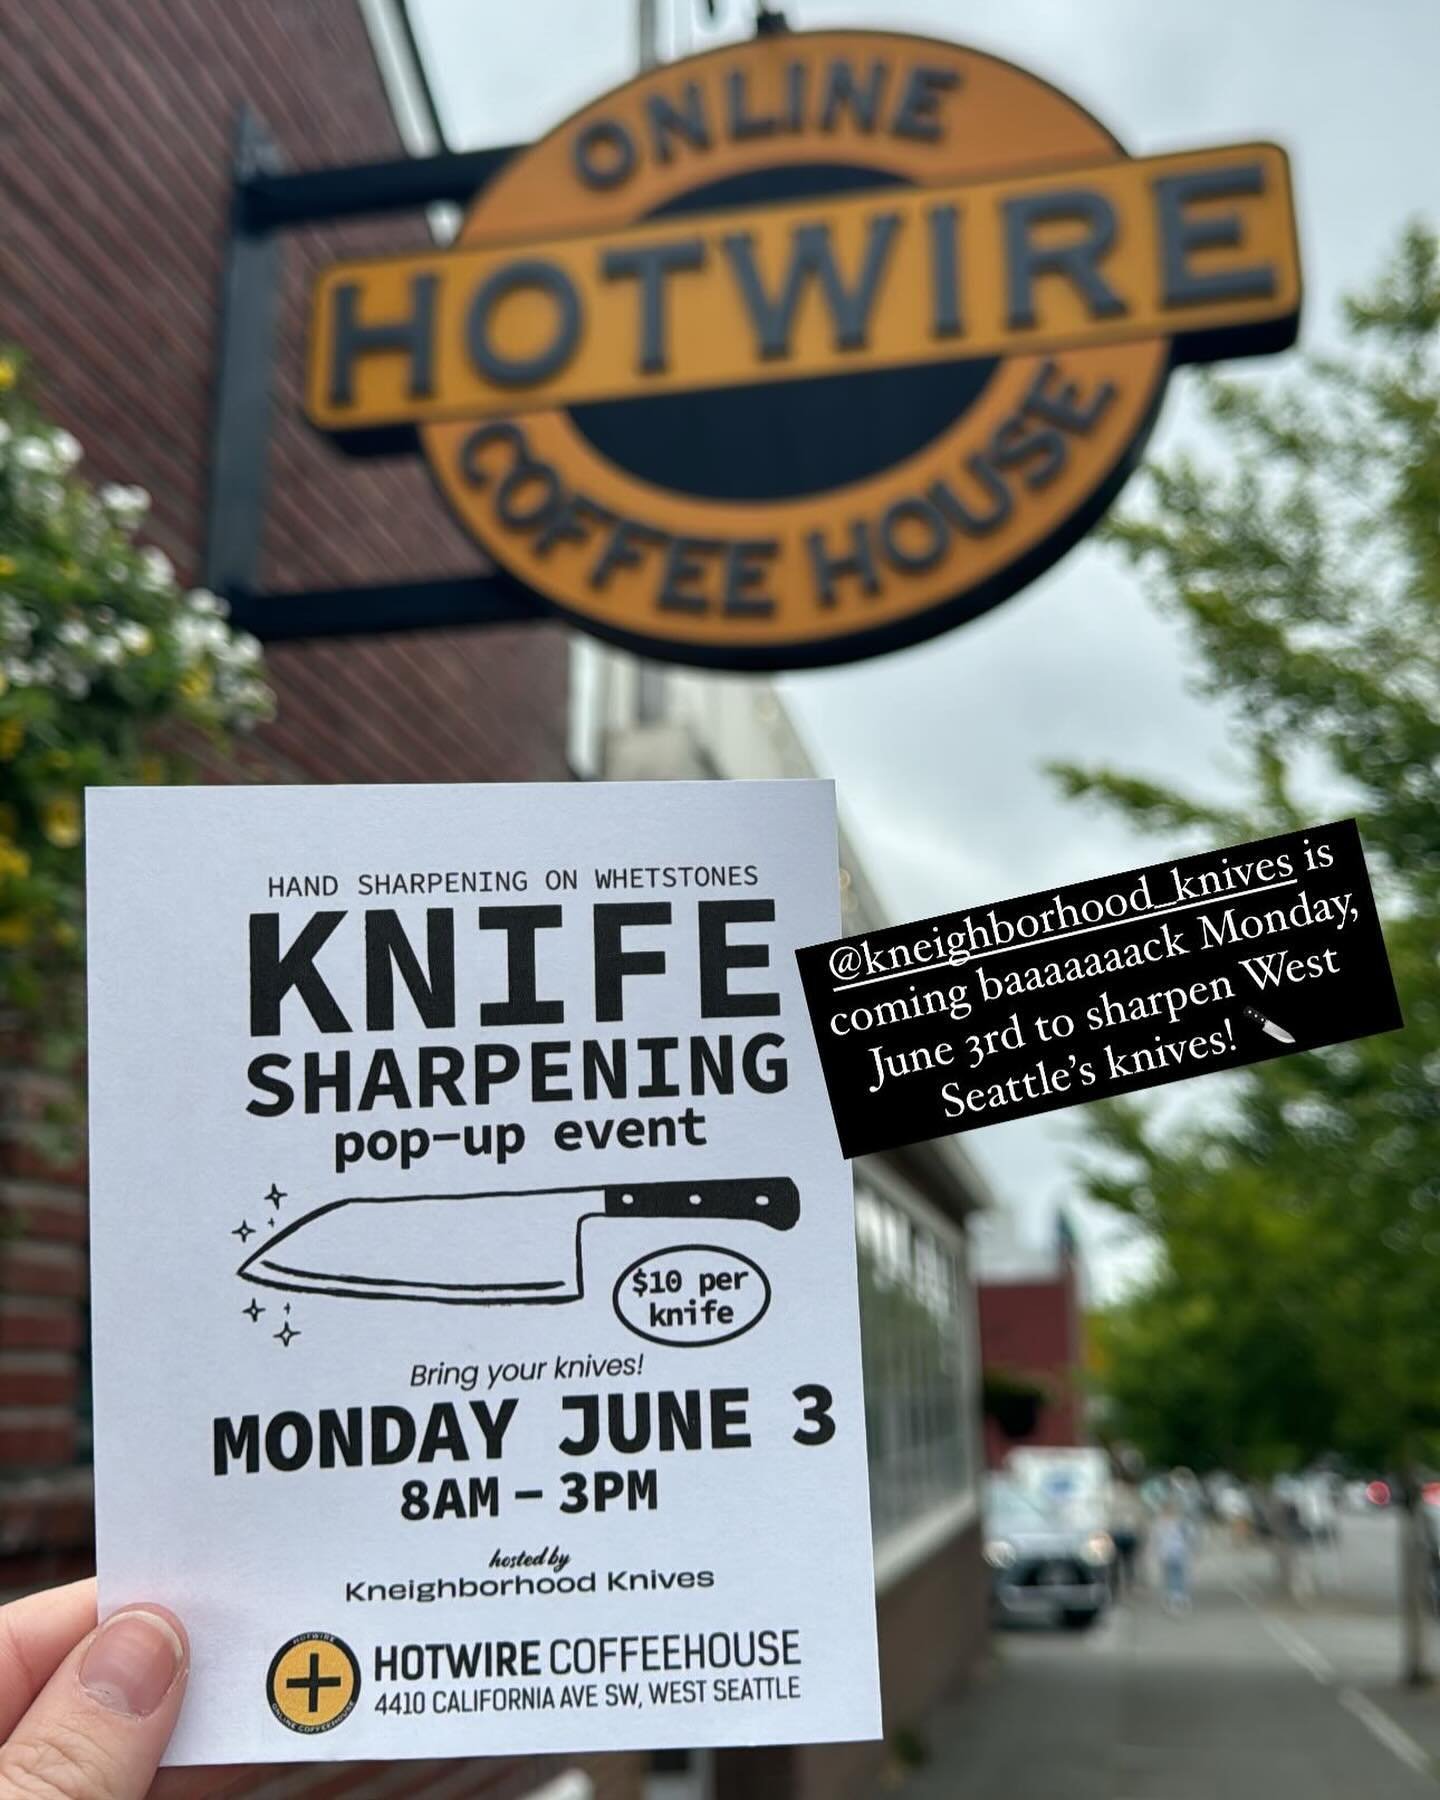 Mark your calendar for June 3rd, when @kneighborhood_knives returns for another knife 🔪 sharpening pop-up at @hotwirecoffee! ➕☕️

#hotwire #seattlecoffee #specialsofthemonth #hotwirecoffee #westseattle #coffeeholic #caffeine #igcoffee #icedcoffee #c